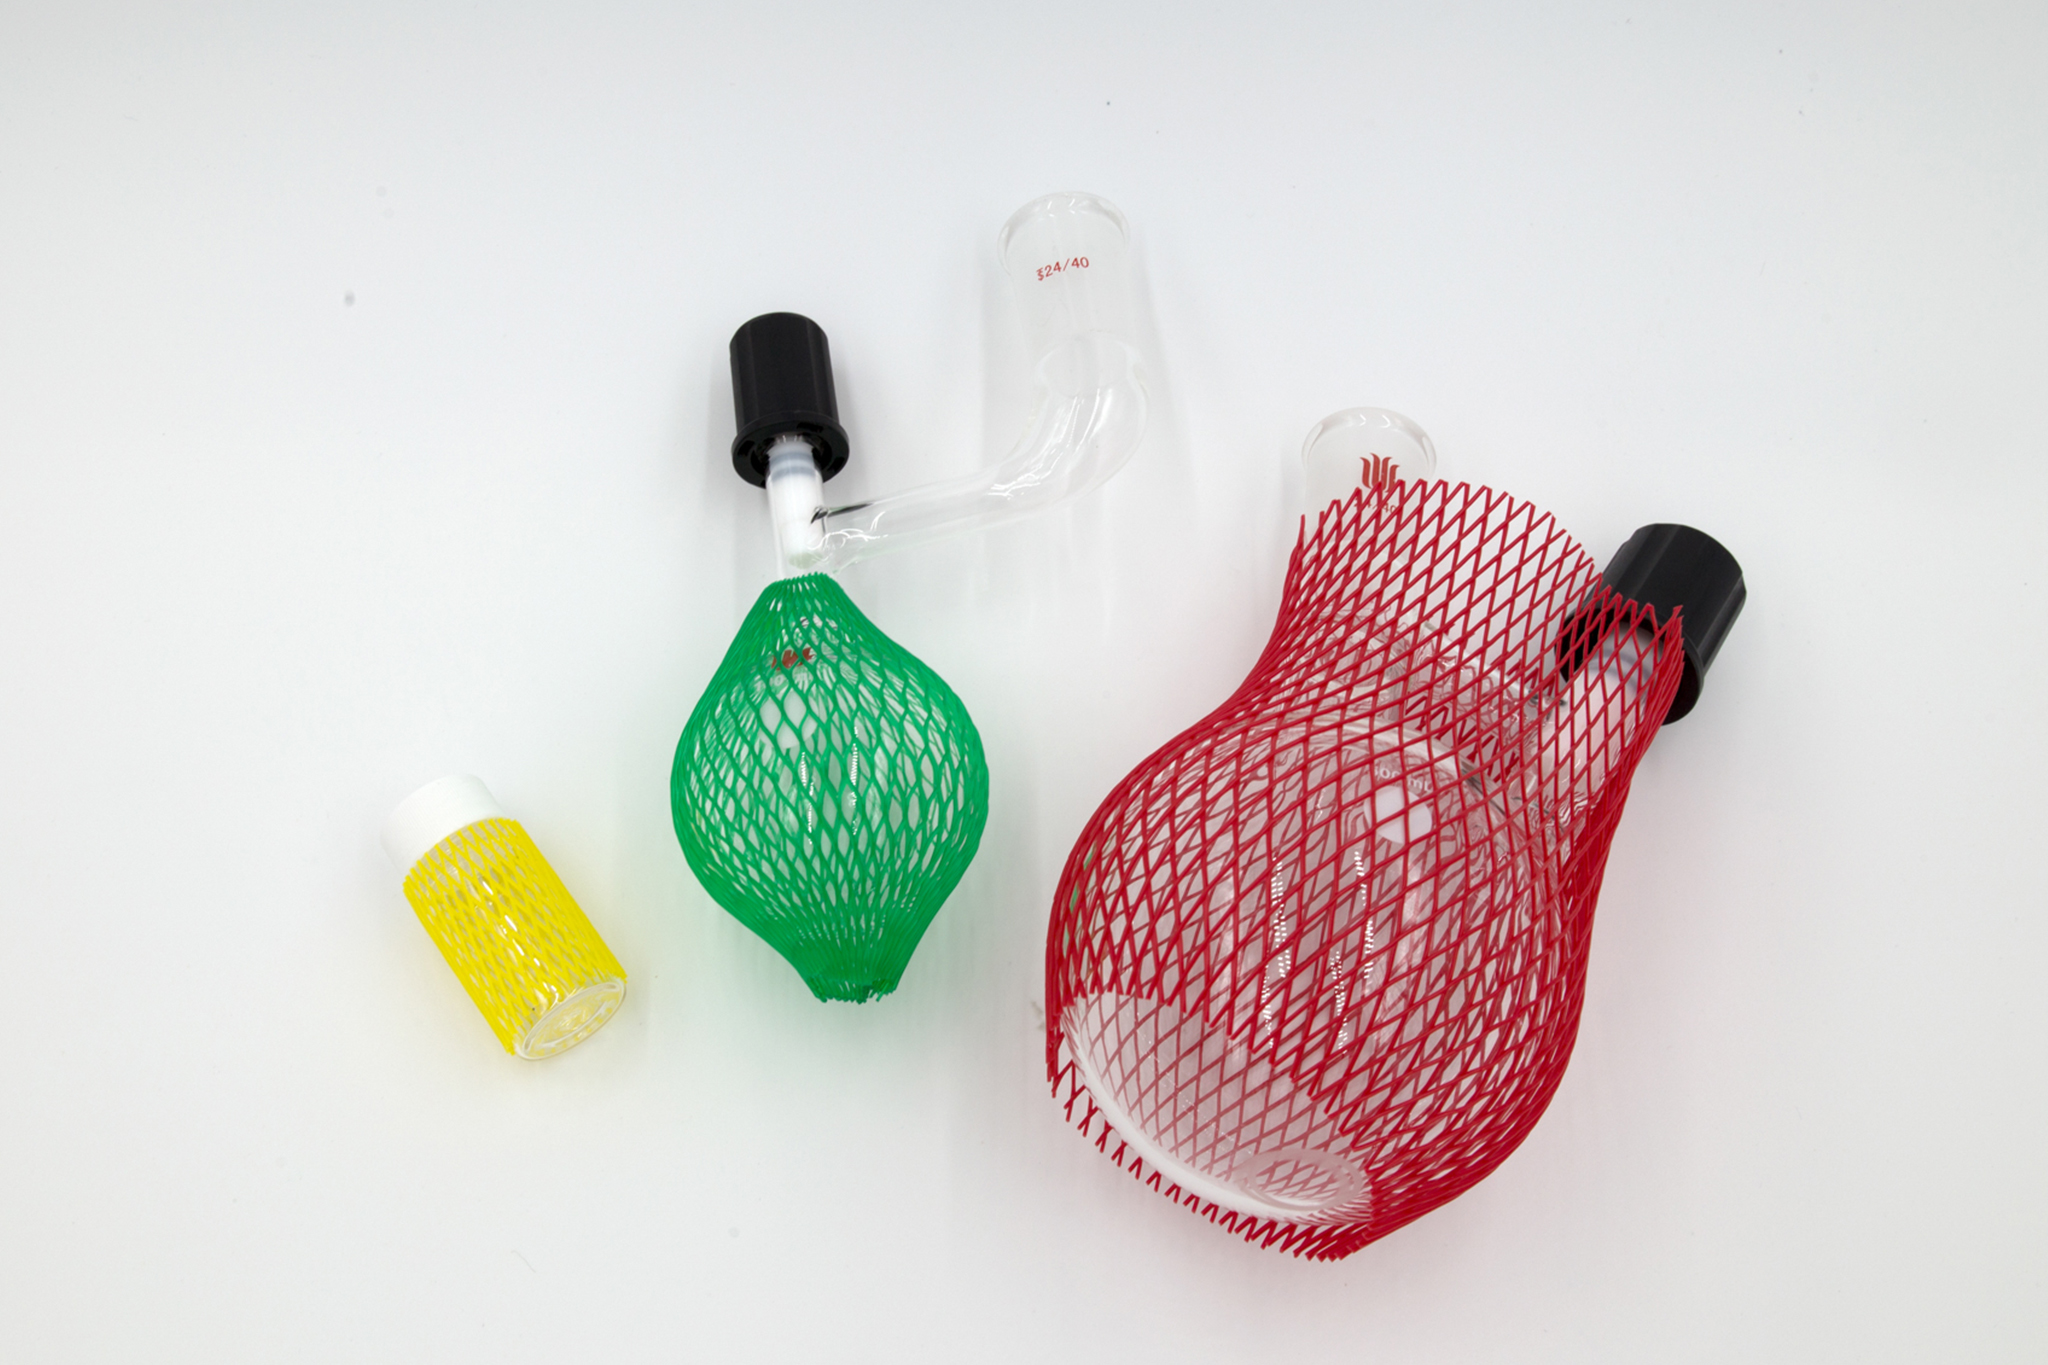 Three laboratory glasswares with protective netting on a white background